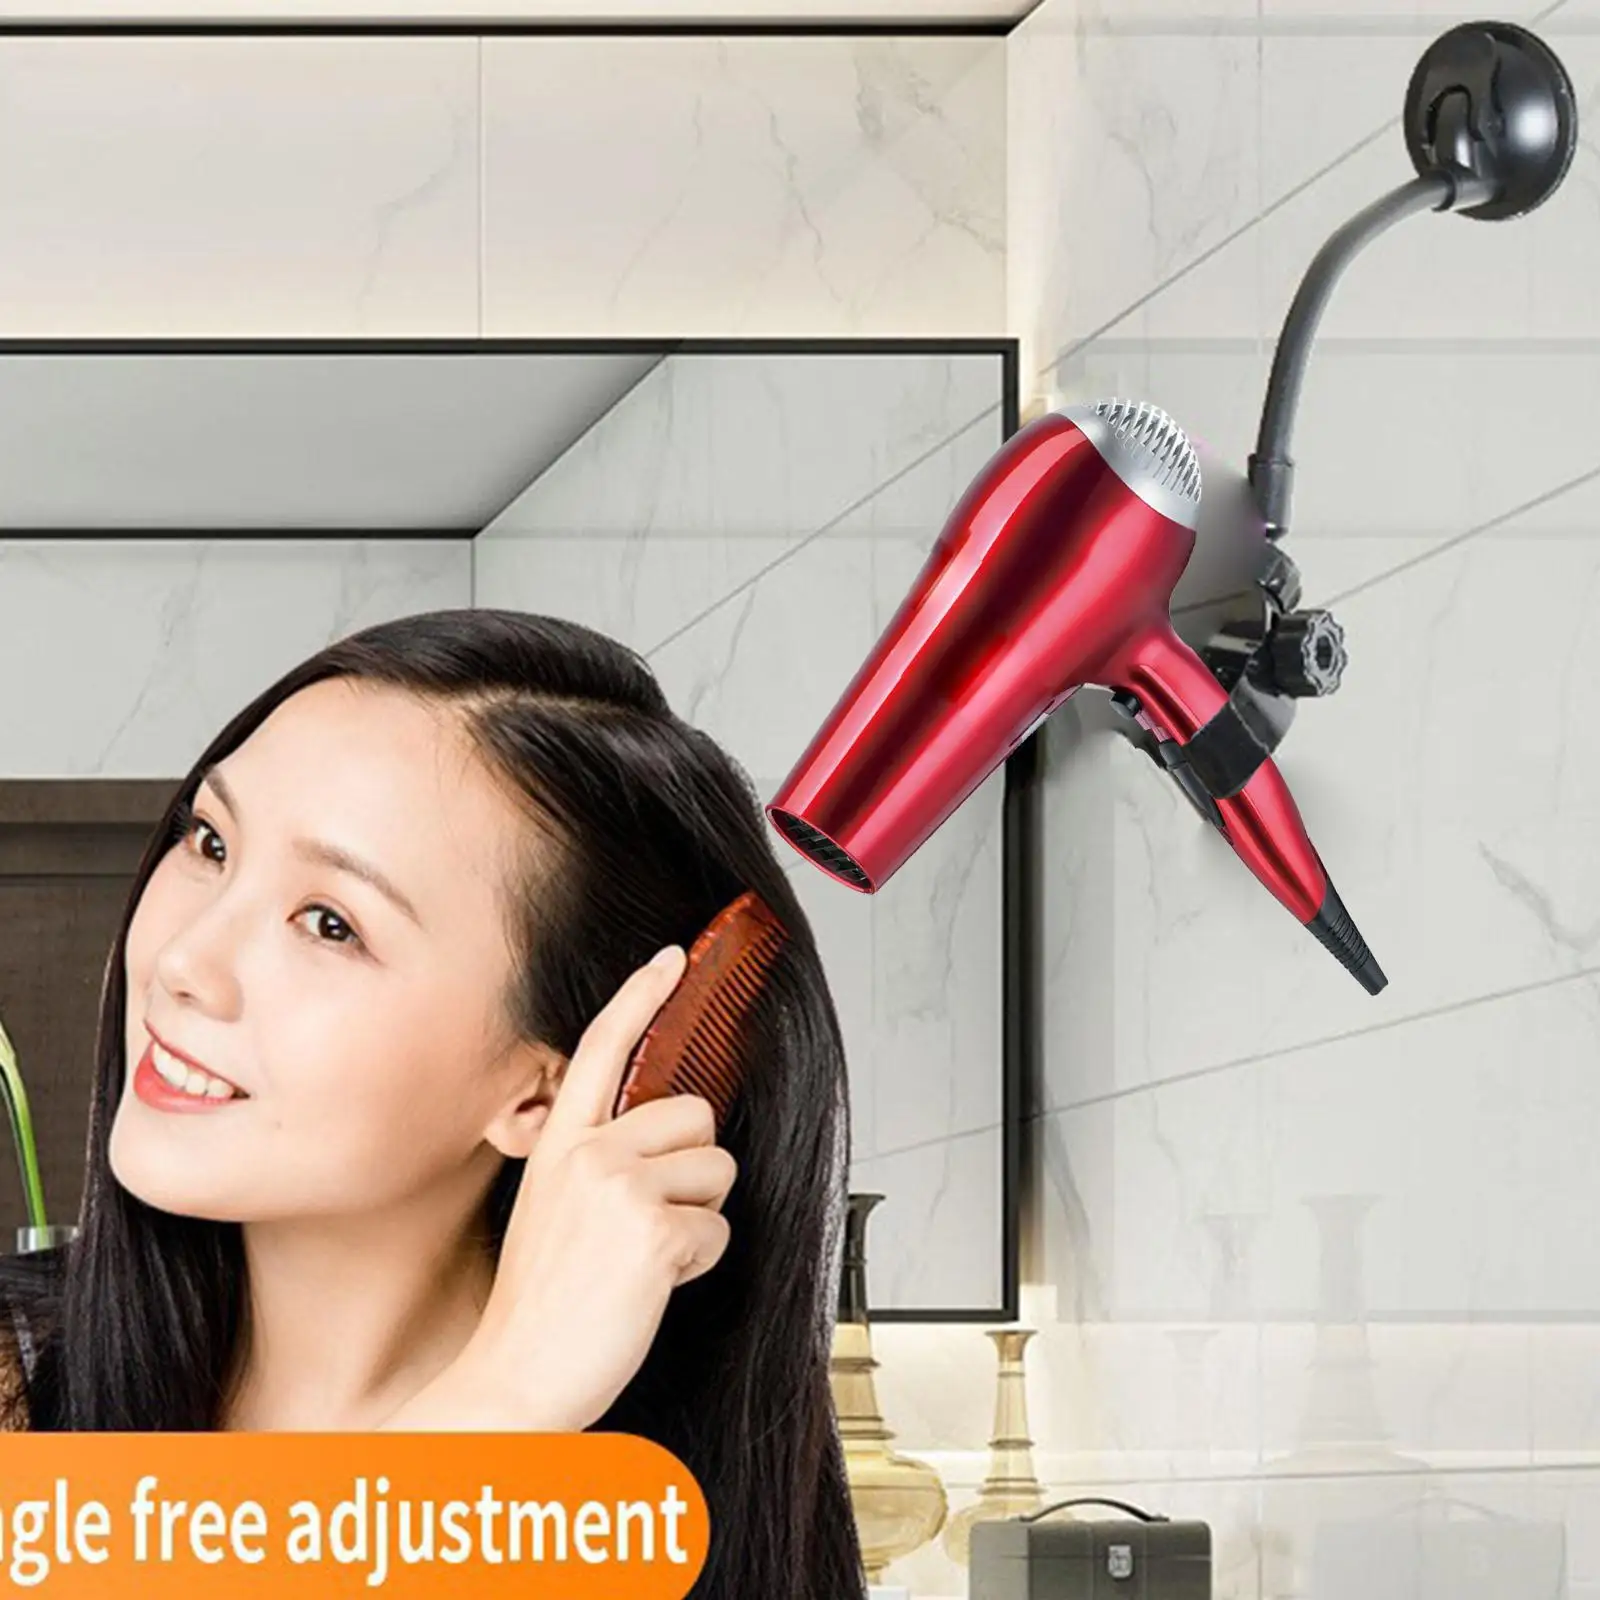 Hair Dryer Holder Rack Suction Cup 360 Degree Rotating Cabinet Door Support Blow Dryer Stand for Most Hair Dryers Washroom Home